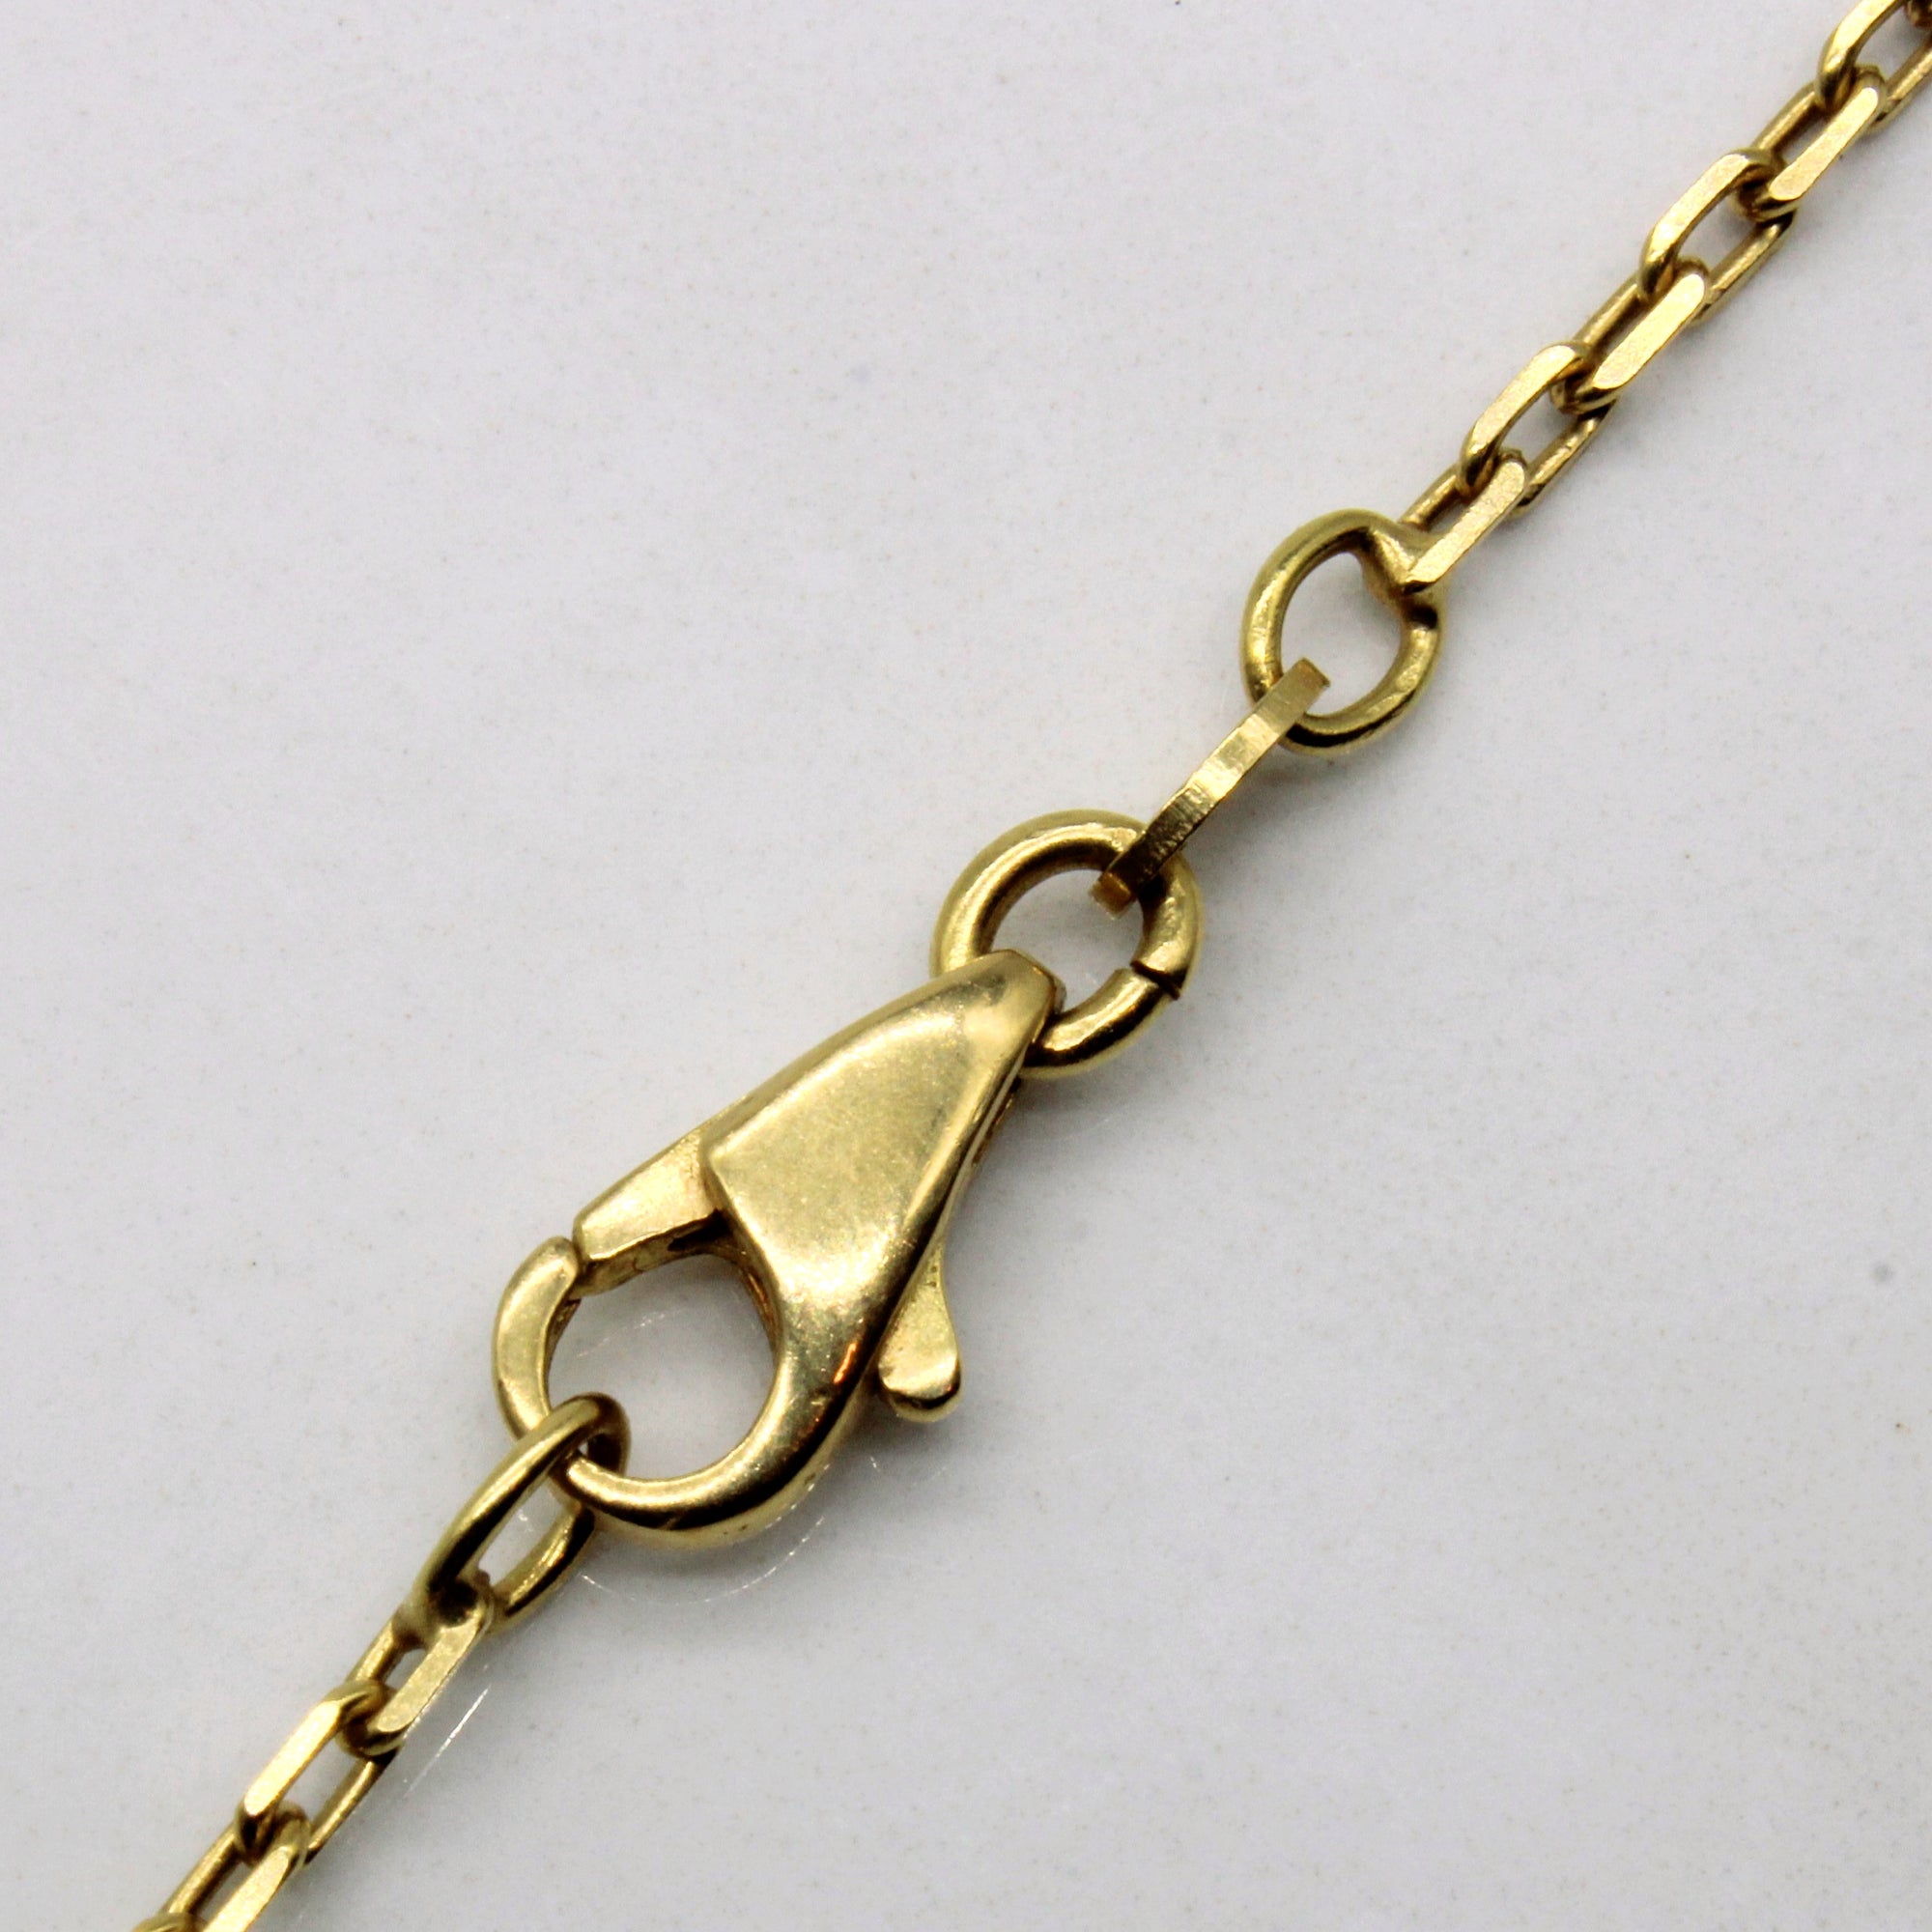 18k Yellow Gold Necklace | 30